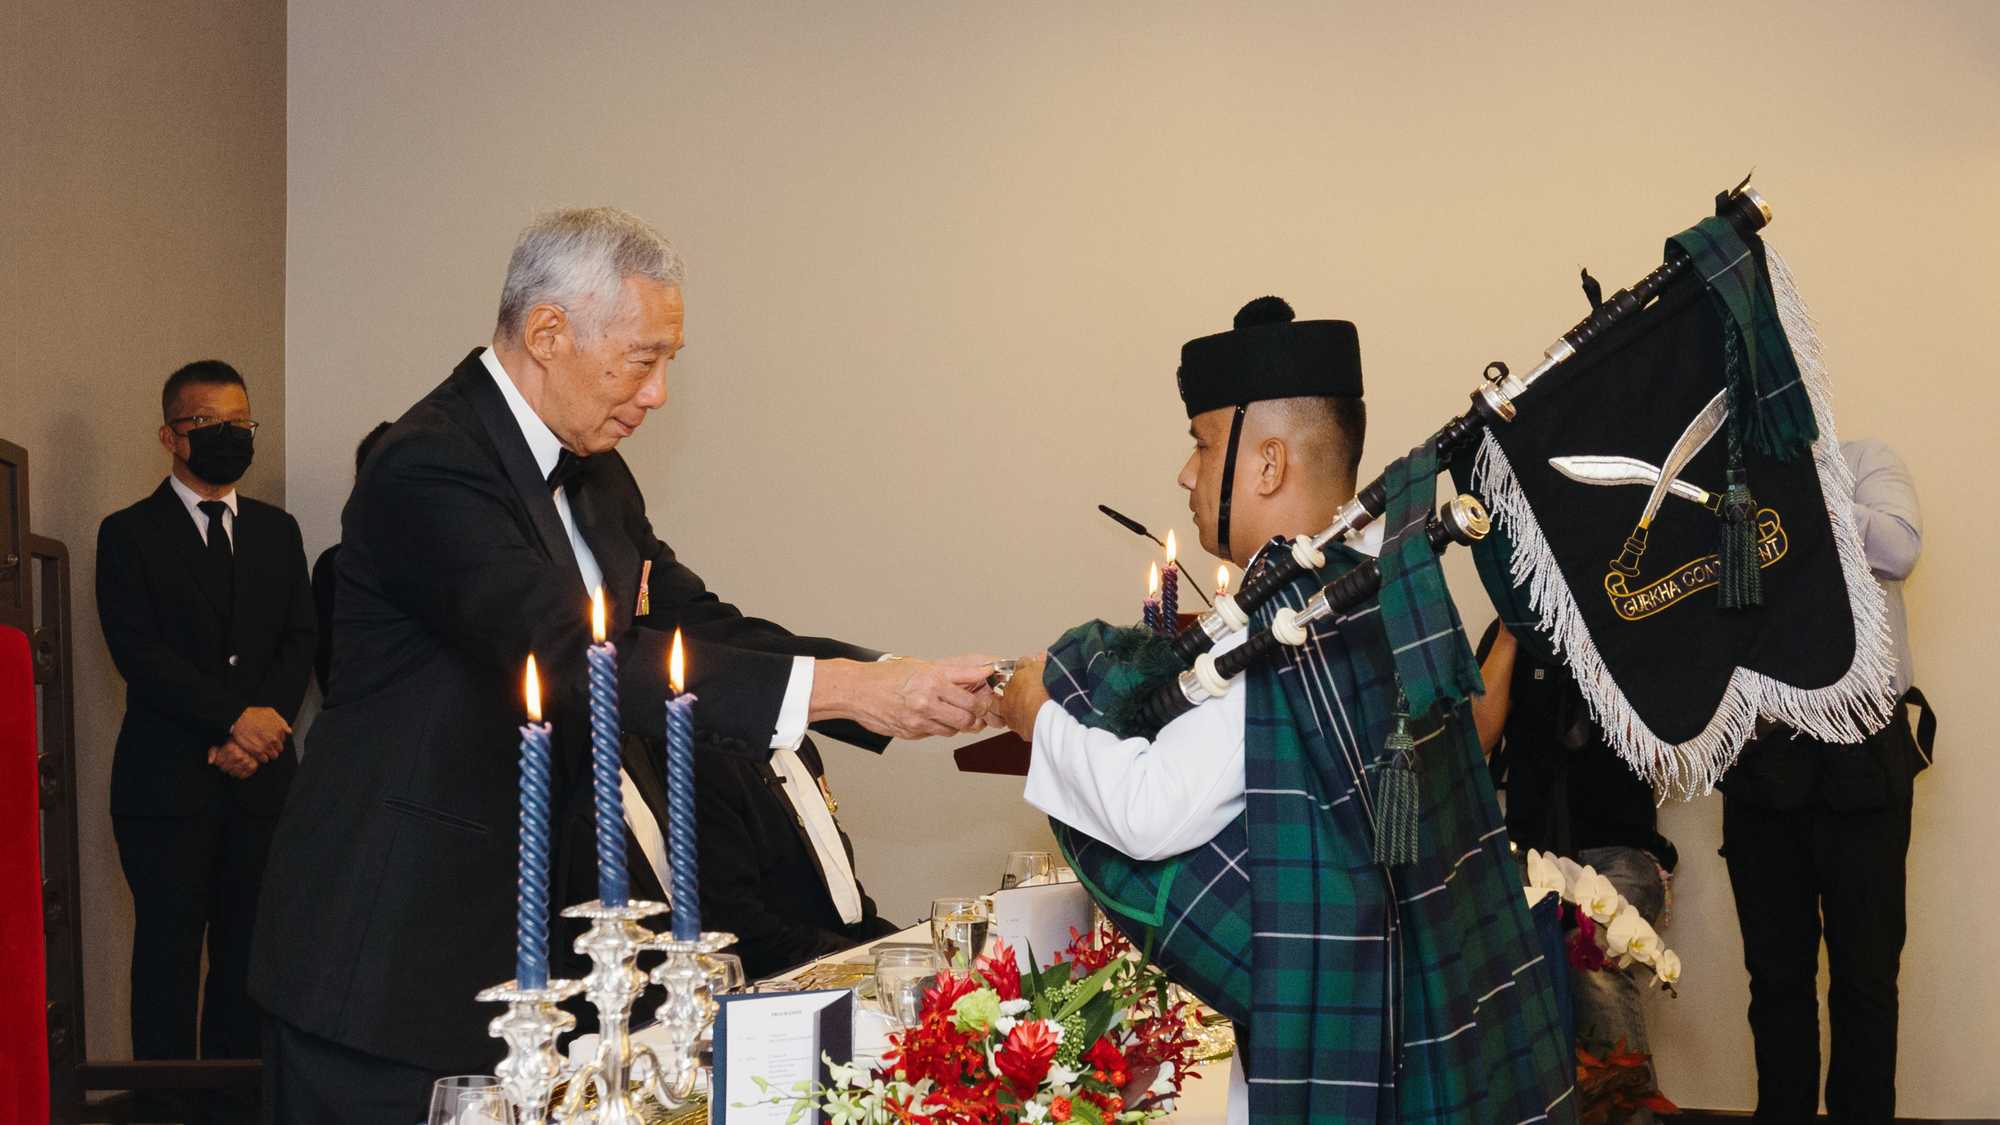 PM Lee Hsien Loong receiving a salute from the Piper Sergeant Major.